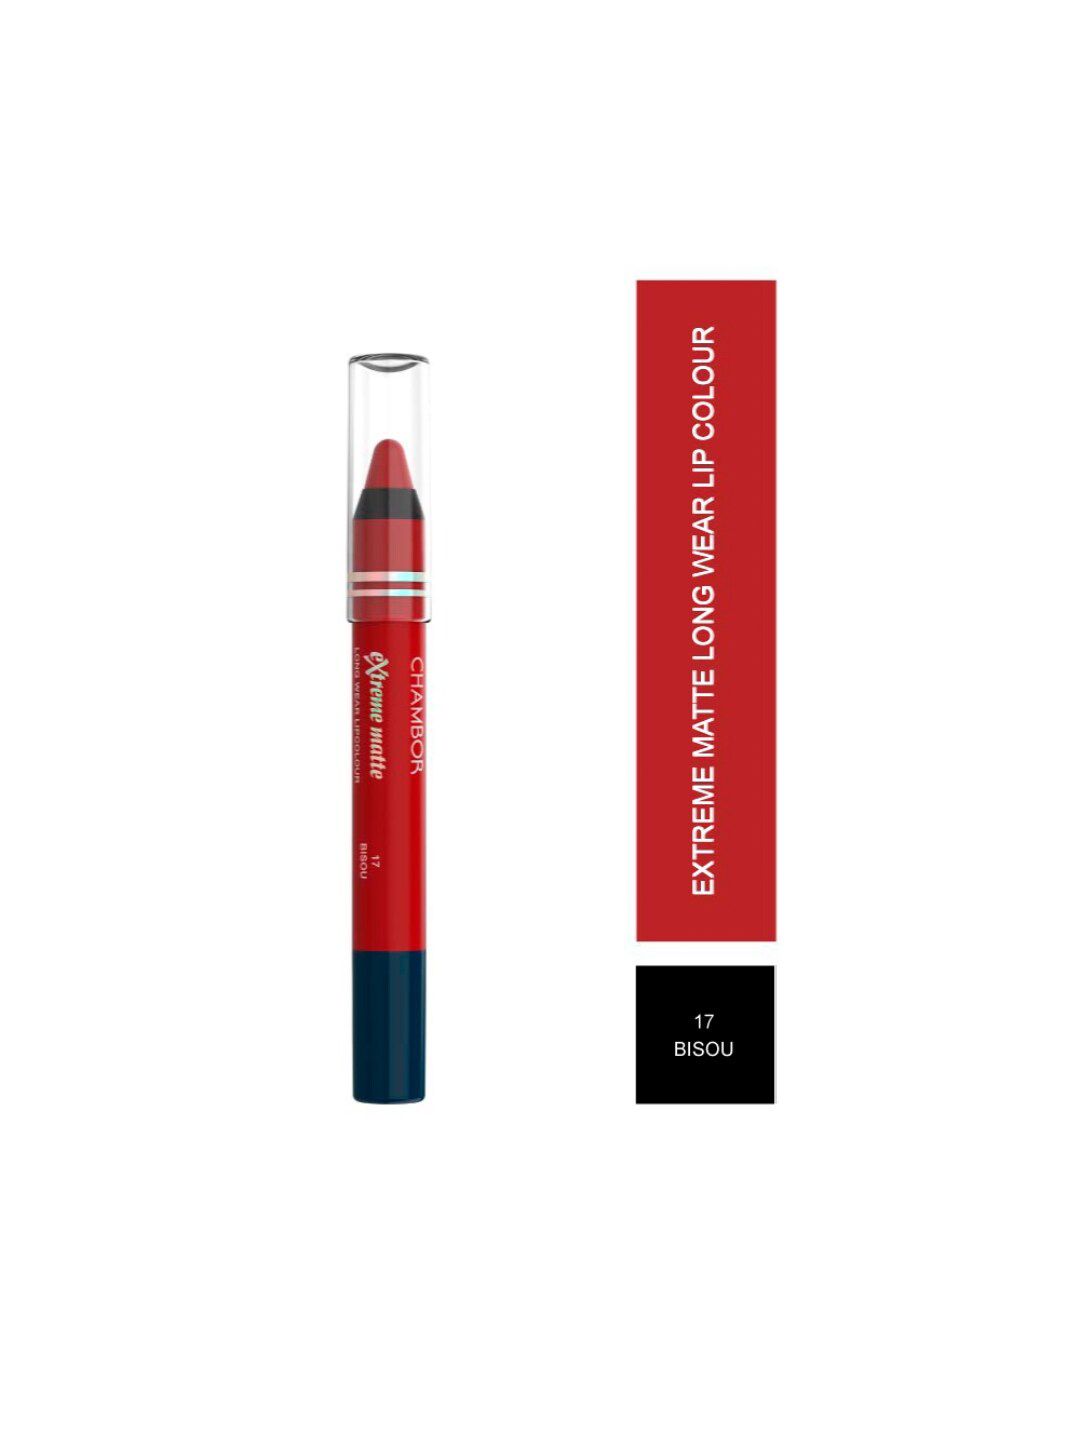 Chambor Extreme Matte Long Wear Lip Colour 2.8 g - Bisou 17 Price in India